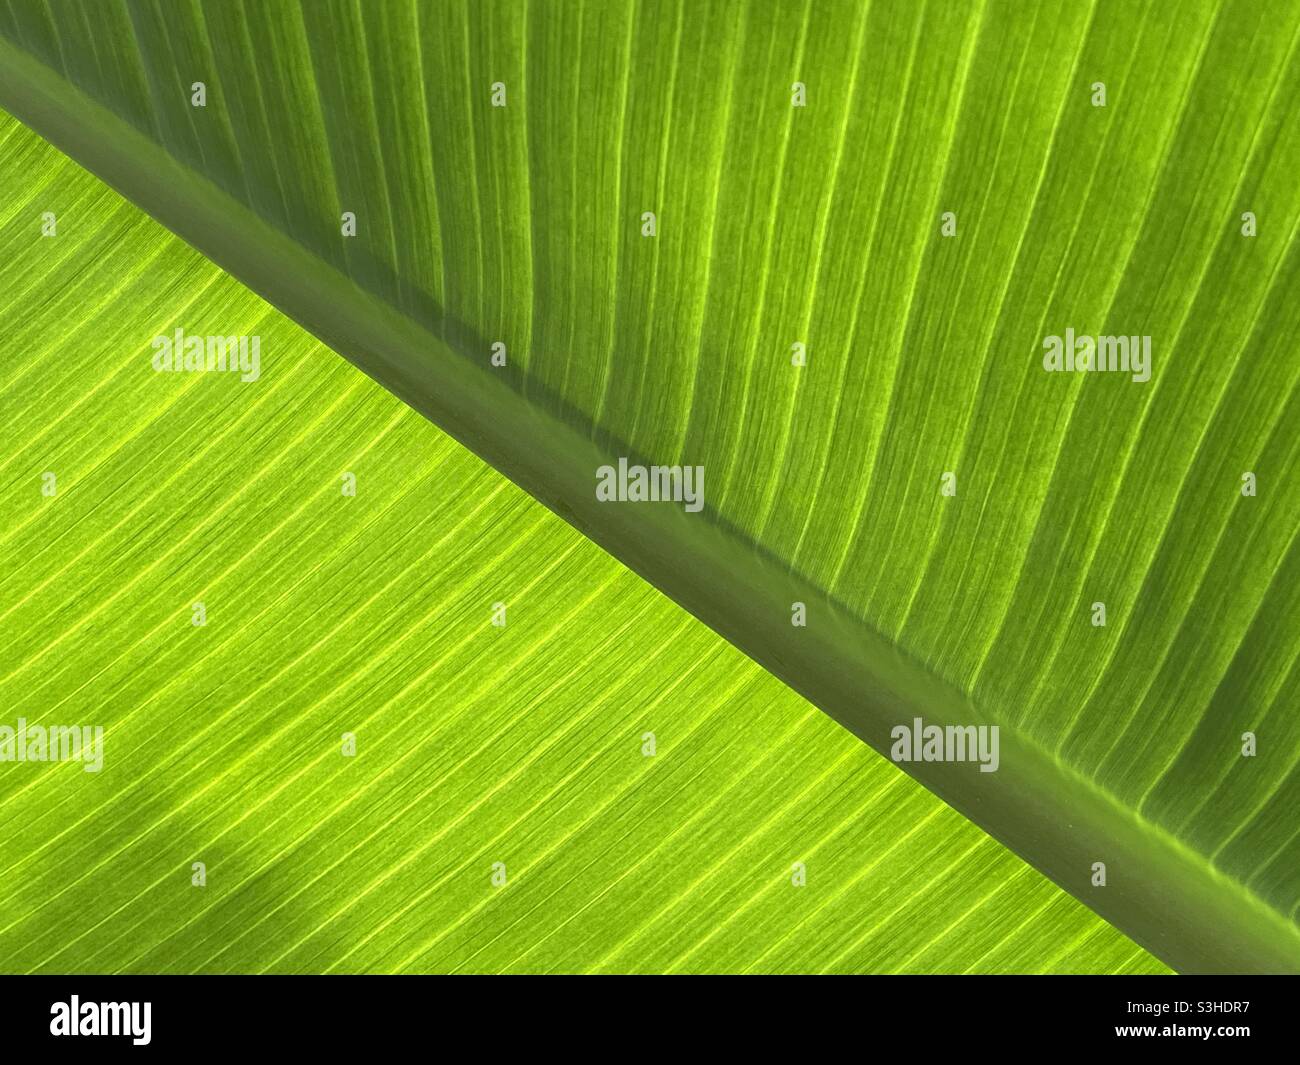 Closeup view of a large leaf backlit by sunlight Stock Photo